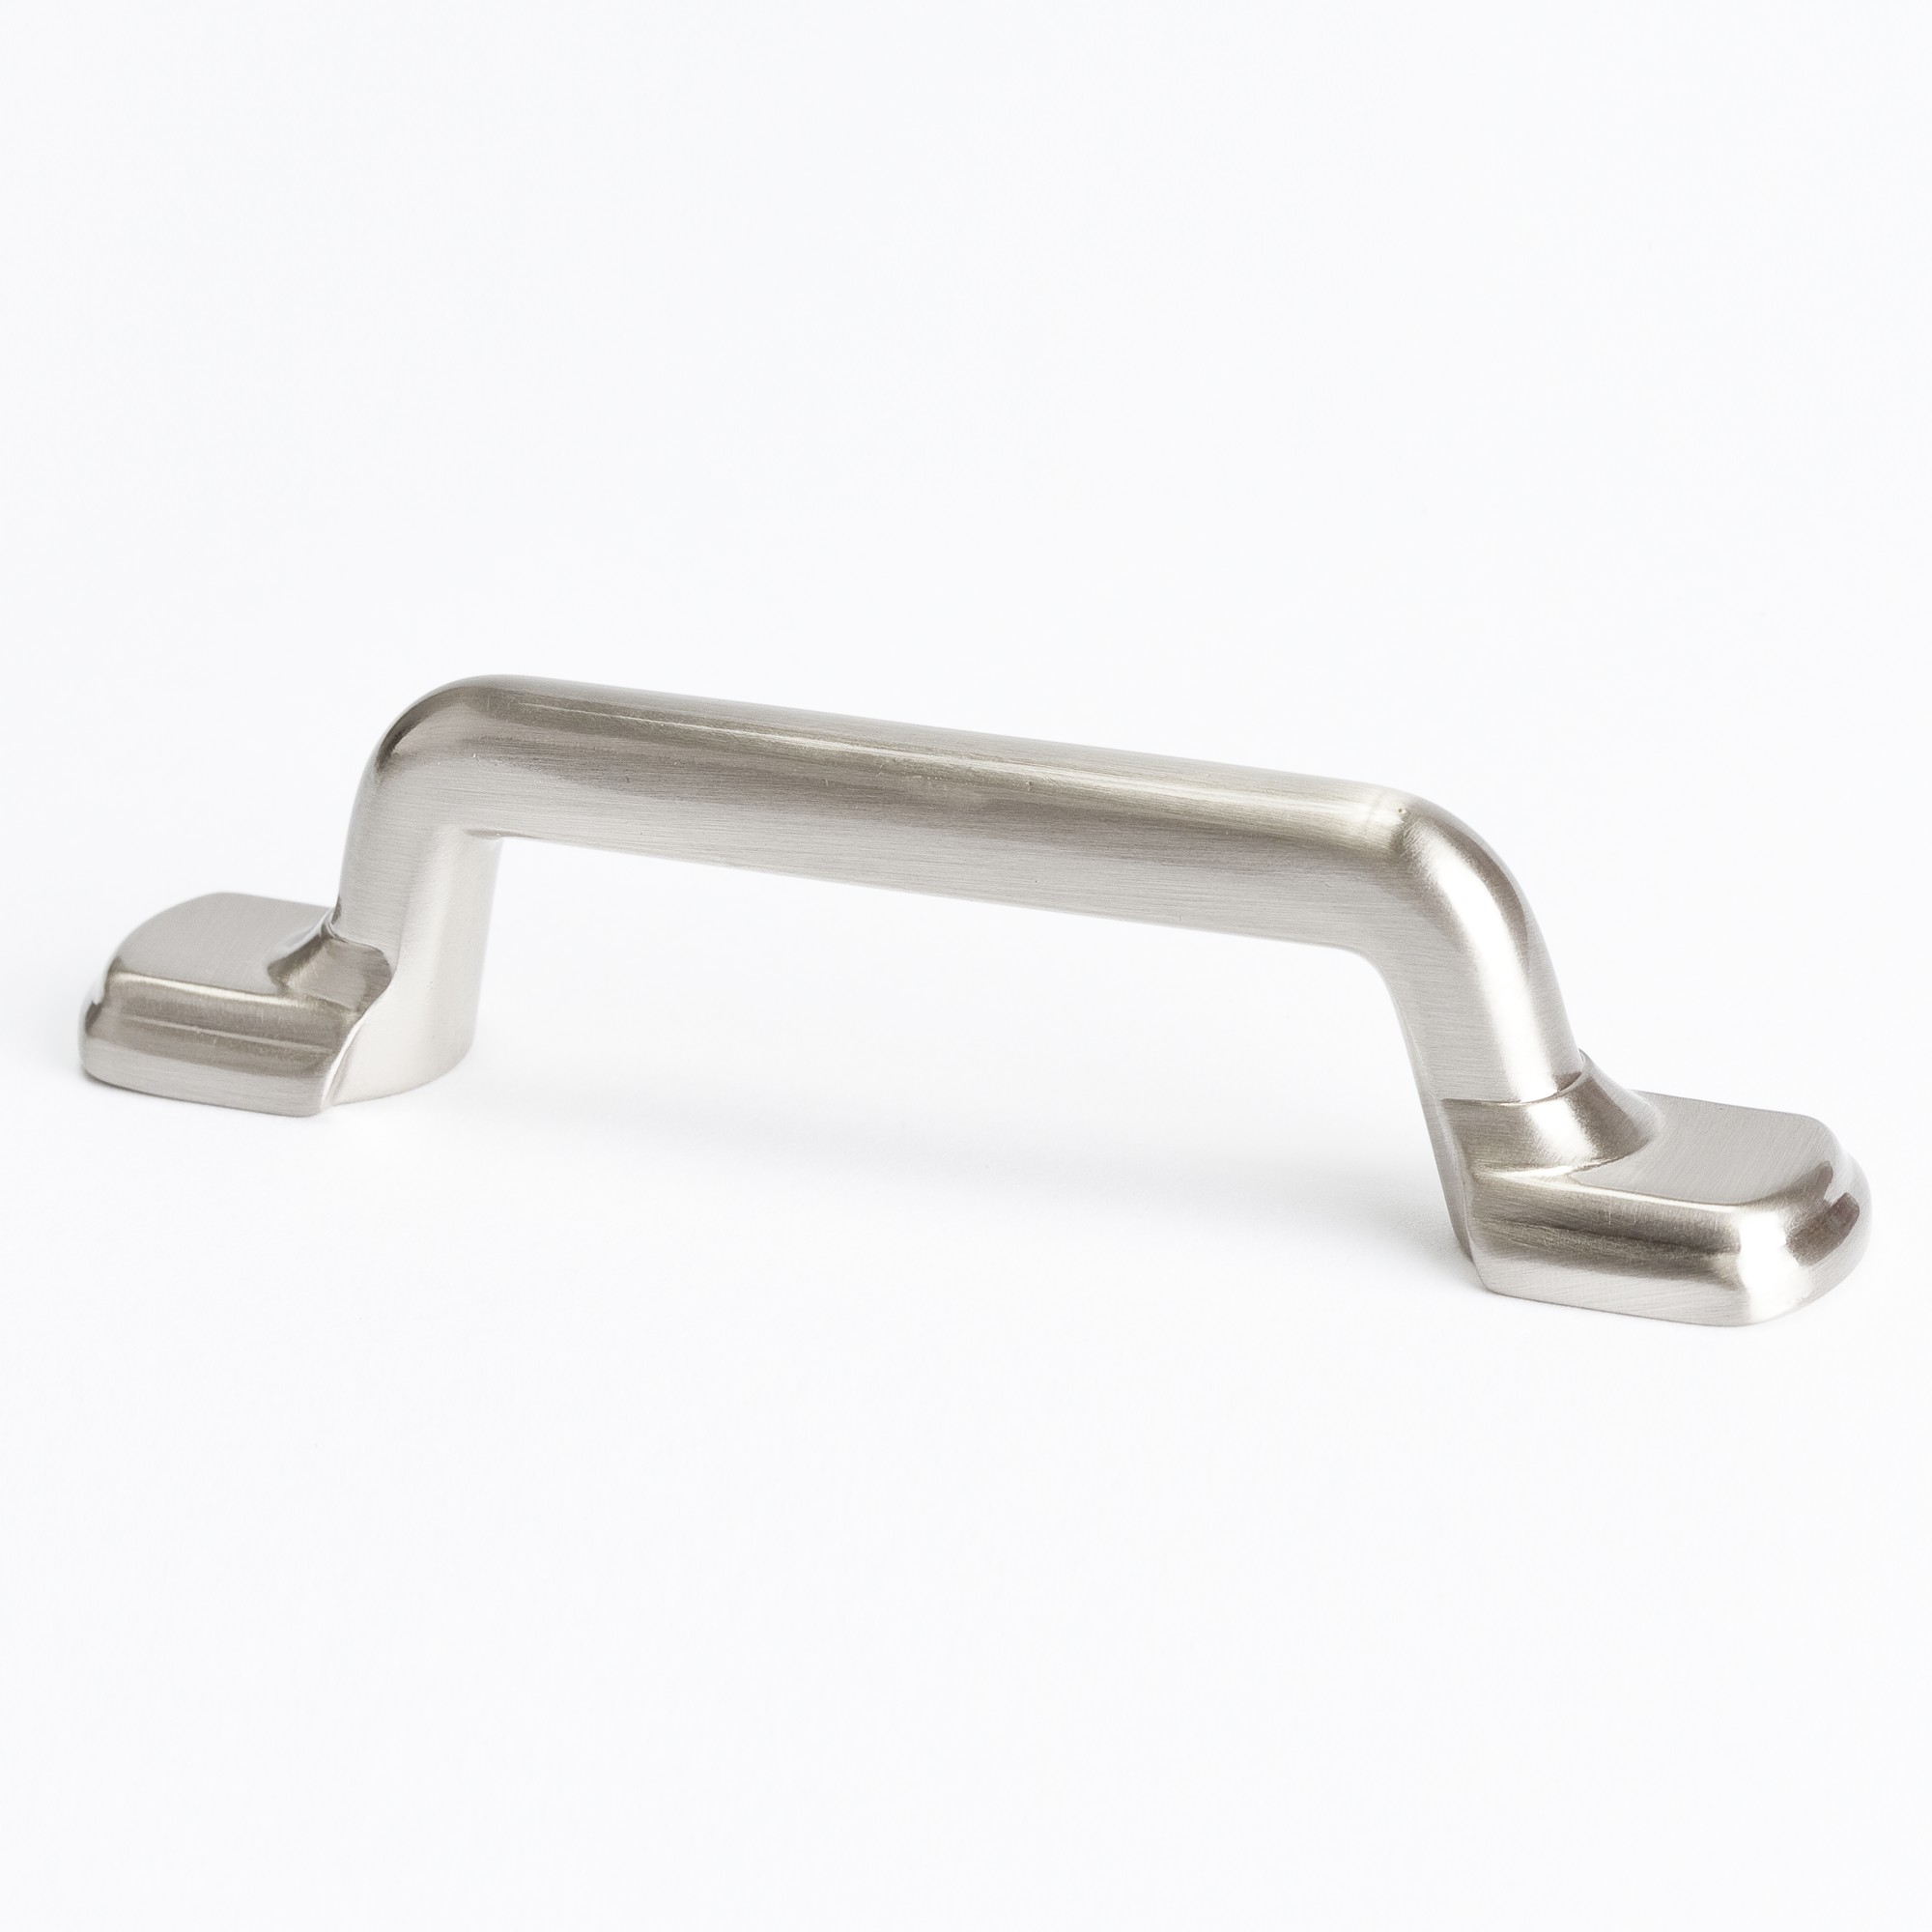 Advantage Plus 2 3" Pull in Brushed Nickel